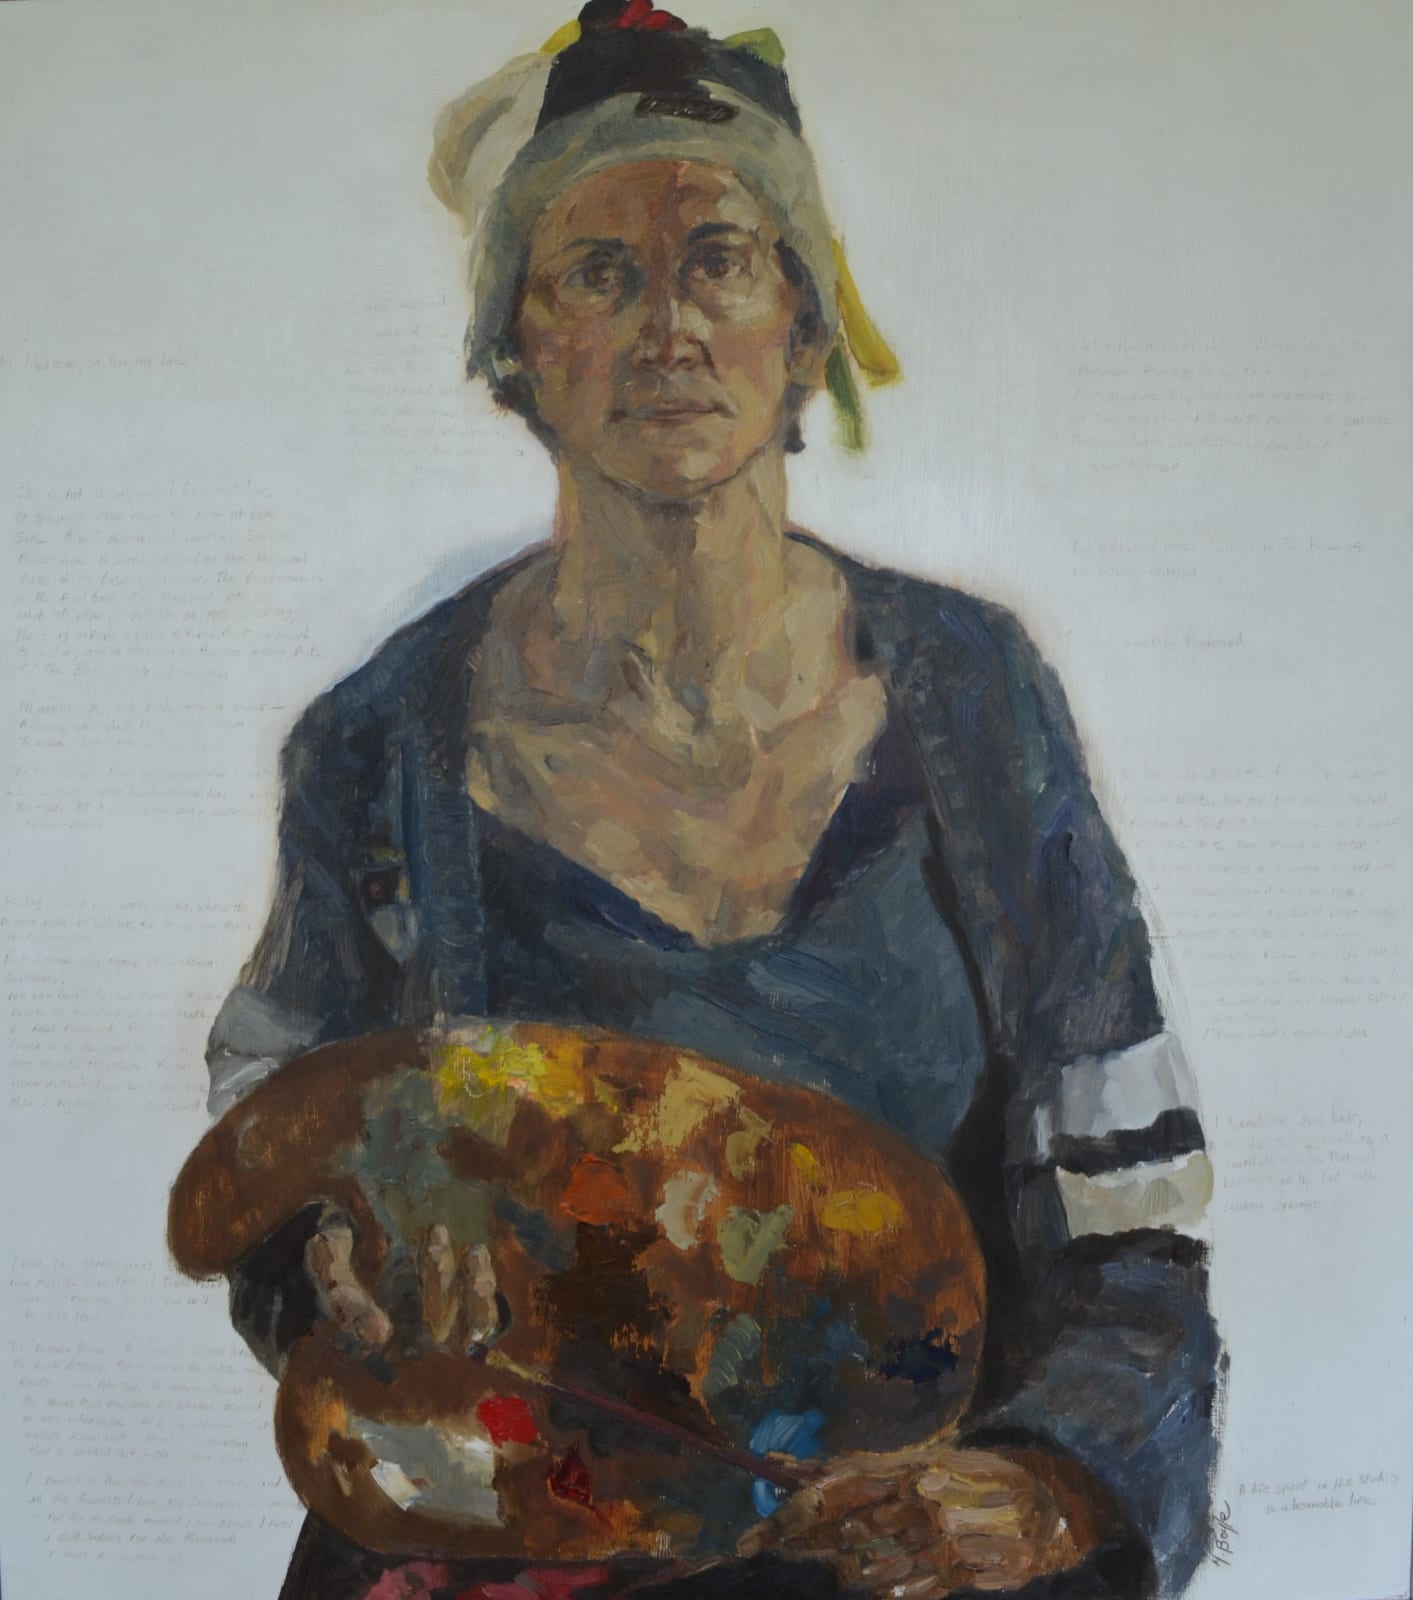 Michelle Boyle, What Painting Is, 2014